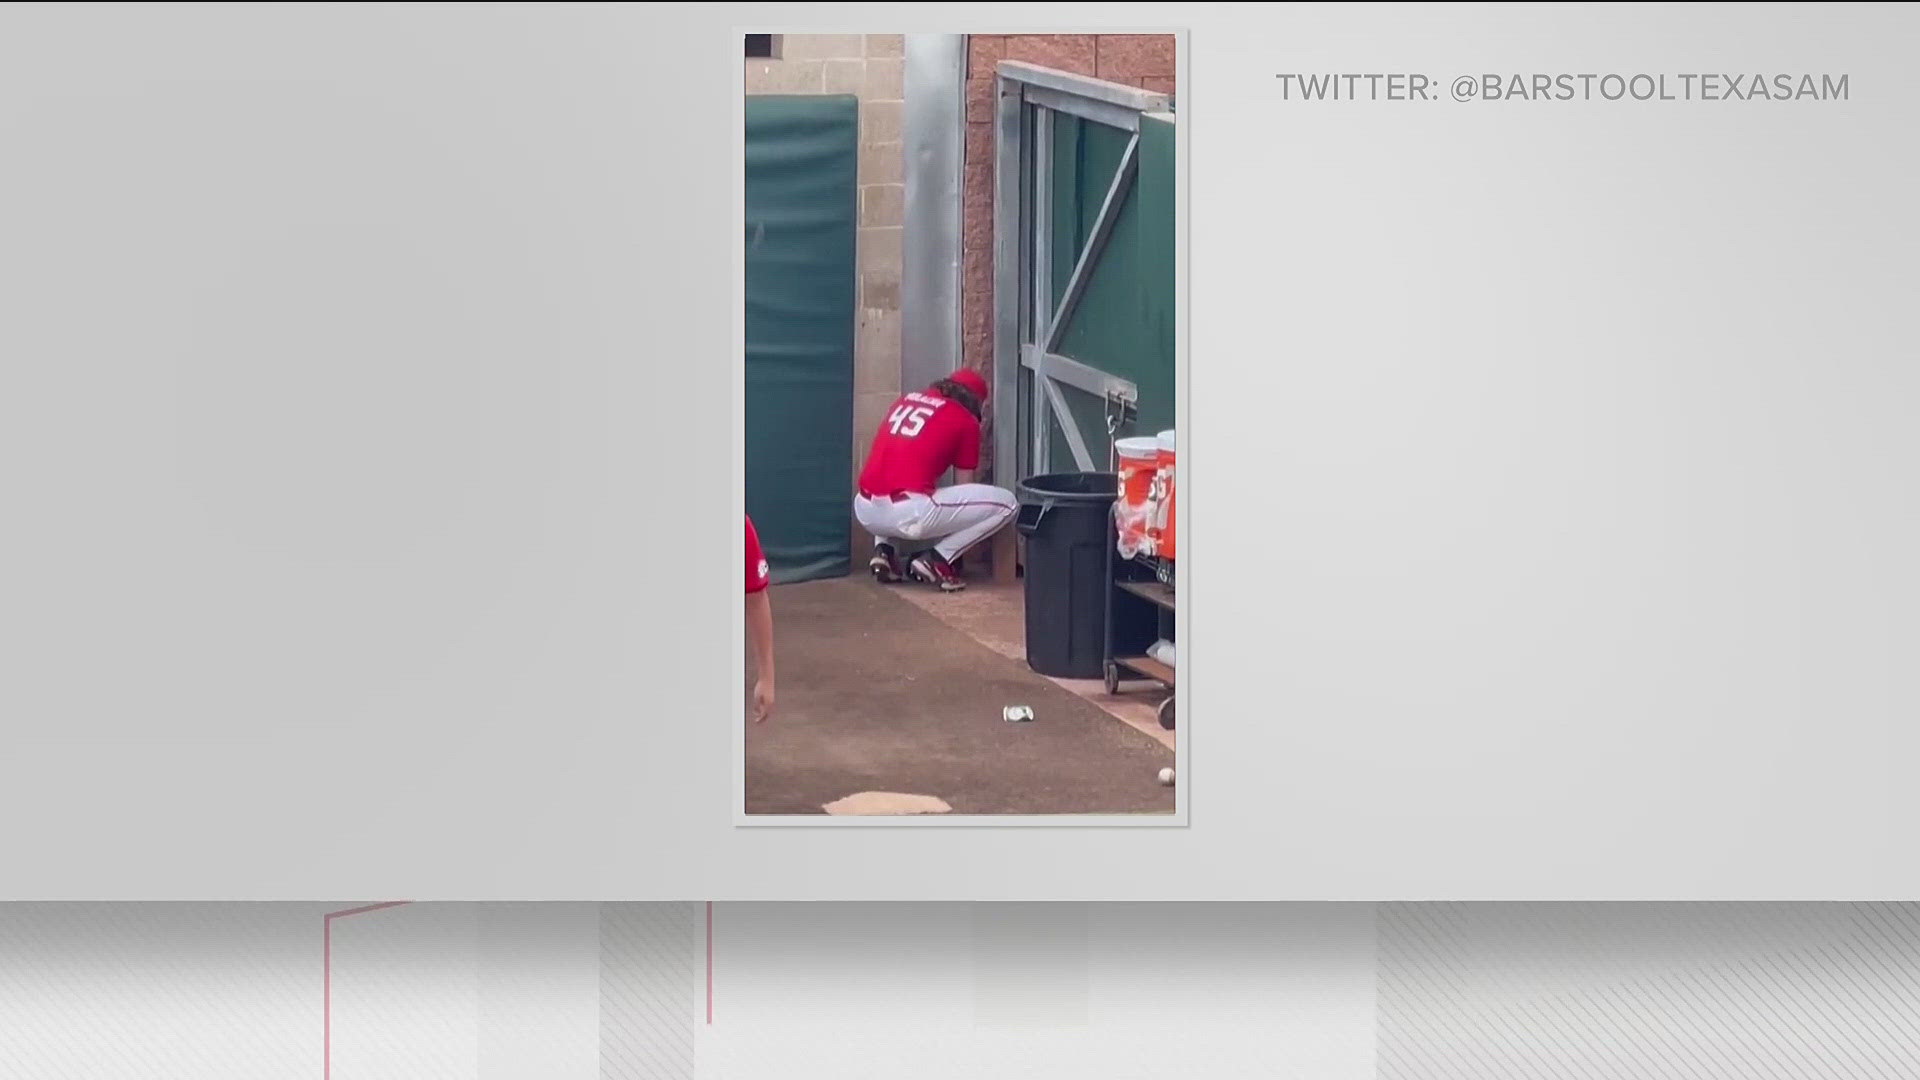 A 30-second video of Christian Mracna in the bullpen, posted by Barstool Texas A&M, showed Mracna appearing to work on his glove in a corner.